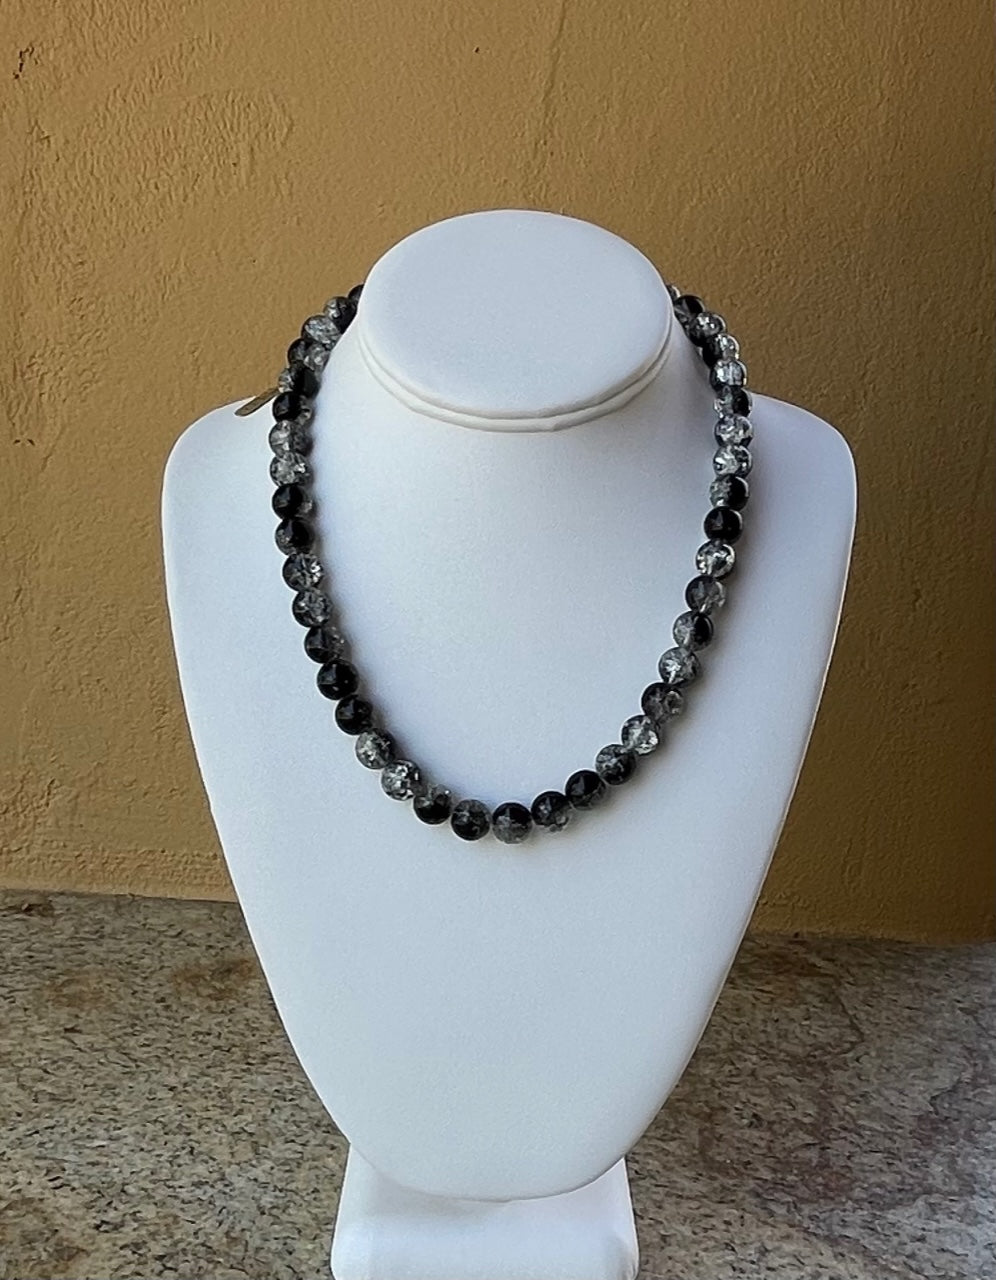 Necklace - Black cracked glass beaded necklace